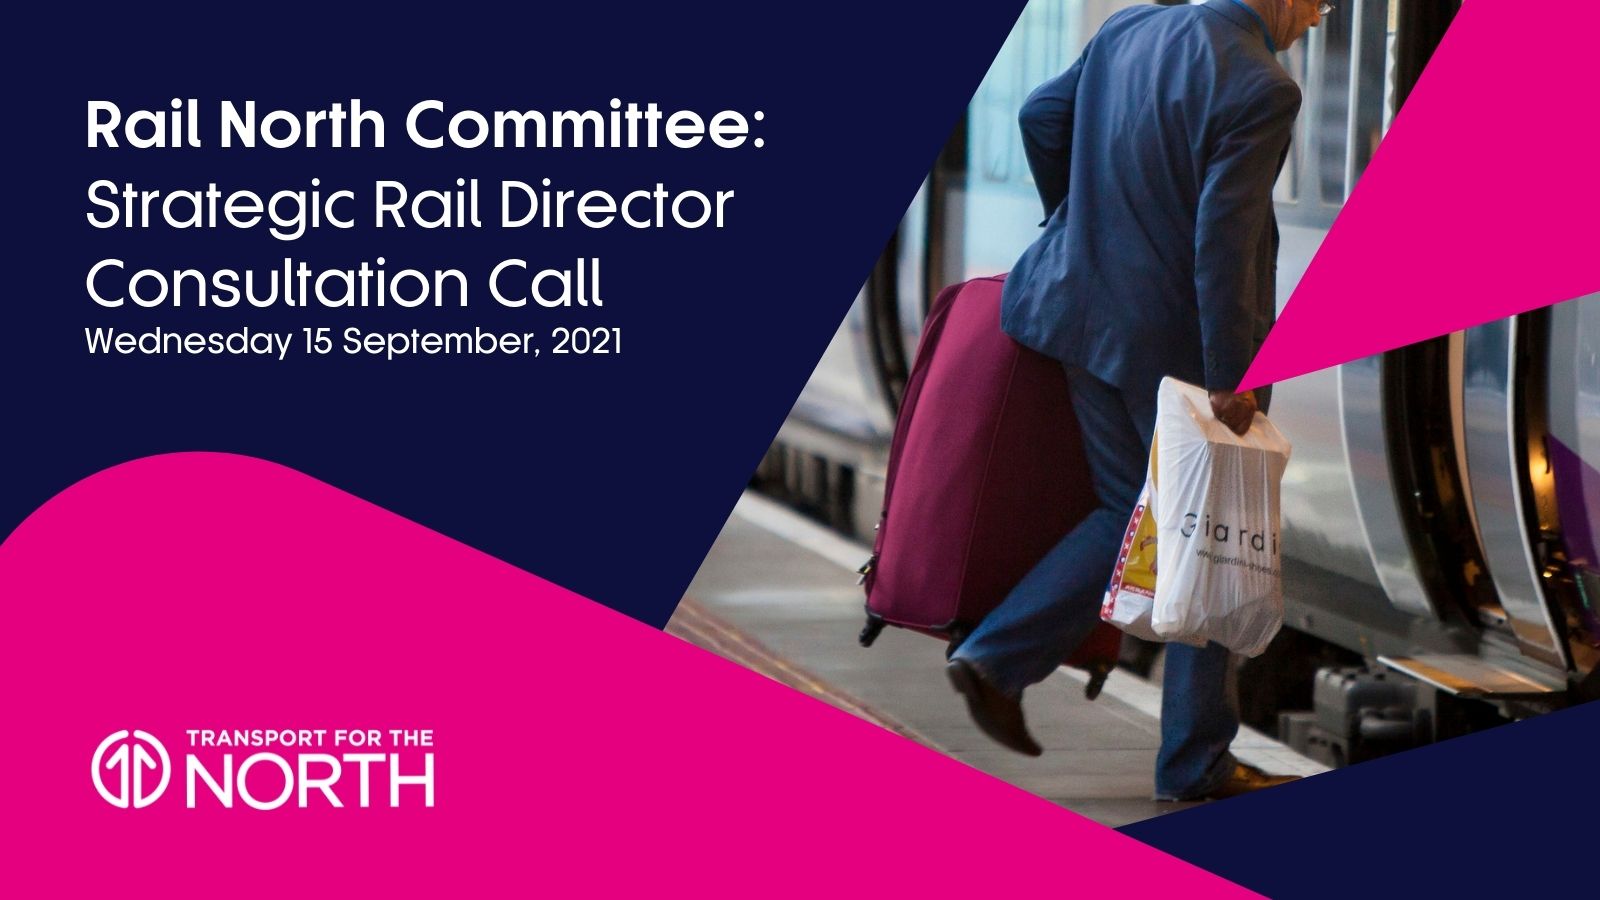 Rail North Committee Strategic Rail Director Consultation Call - Wednesday, 15th September